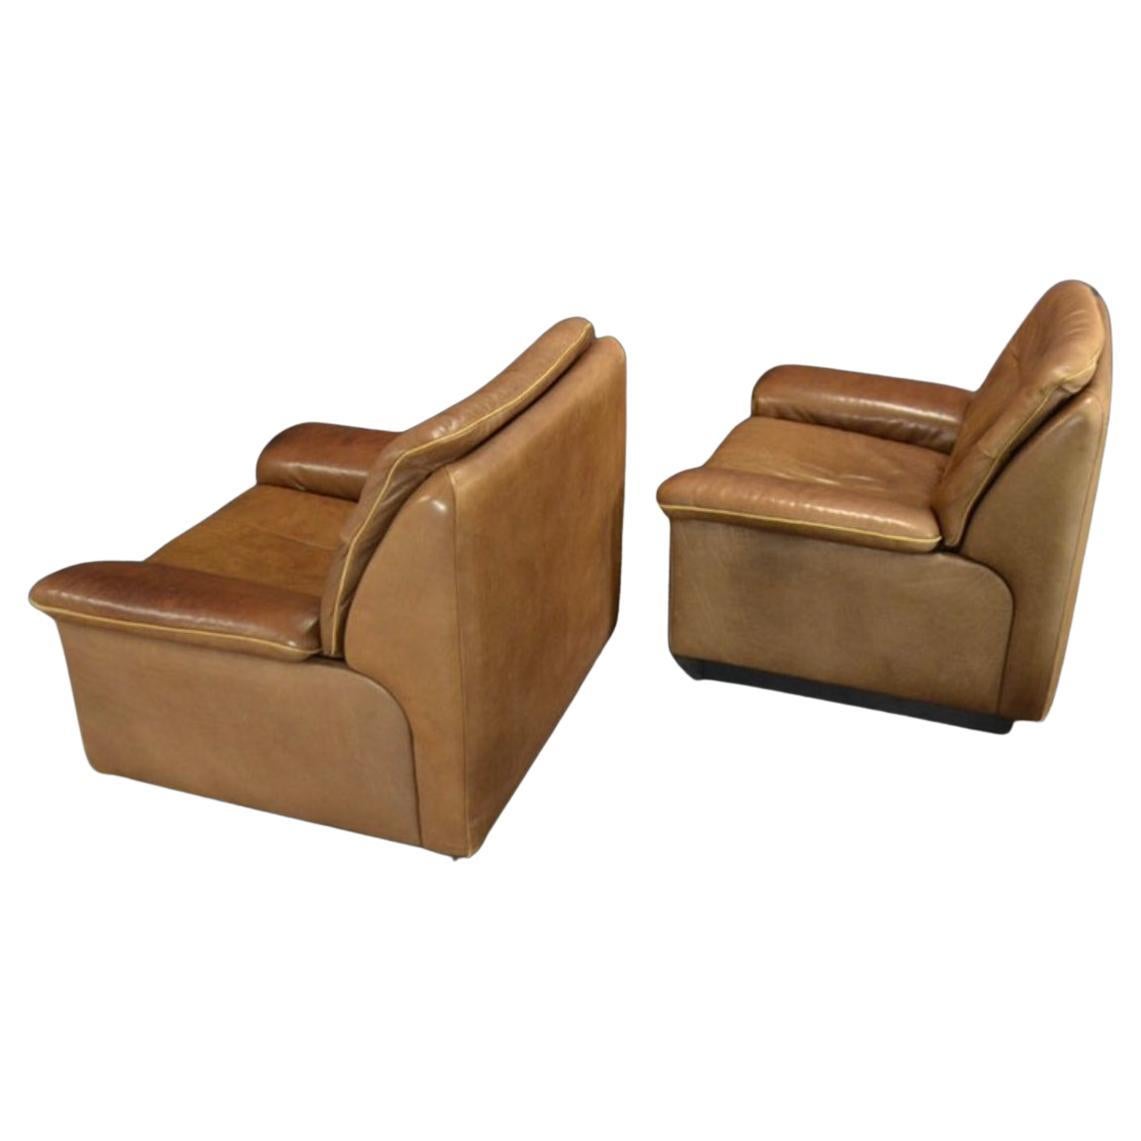 Late 20th Century De Sede DS 66 Chocolate Leather Loveseat and Lounge Chairs Set of 3 For Sale